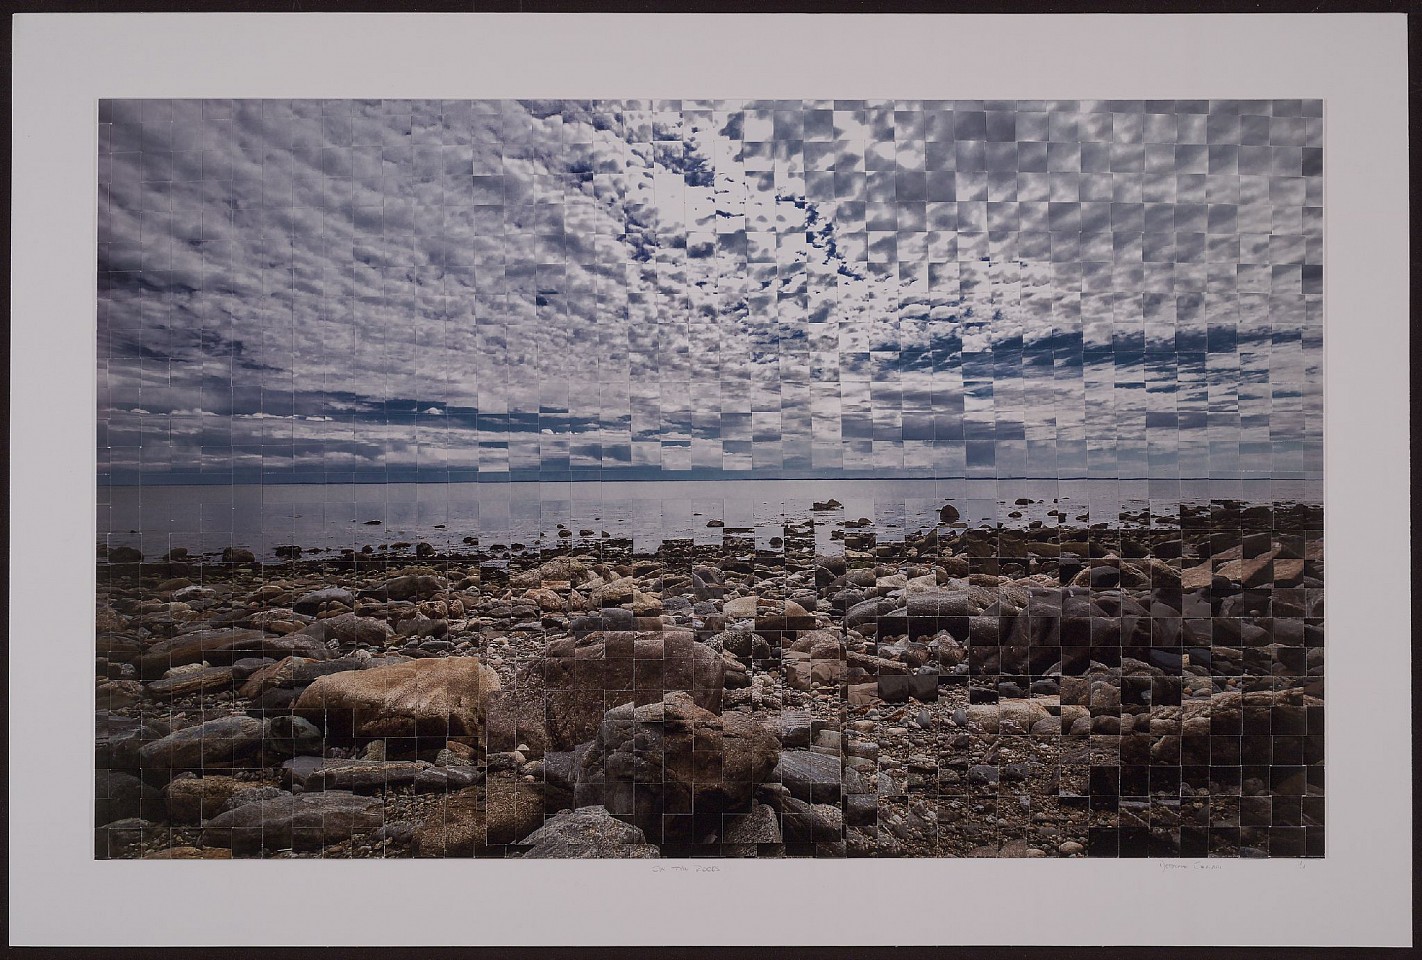 Debranne Cingari (PHOTOGRAPHY), On the Rocks, 2020
Handcrafted Weaved Canson Archival Photograph, 26 x 42 in. (66 x 106.7 cm)
DC200702